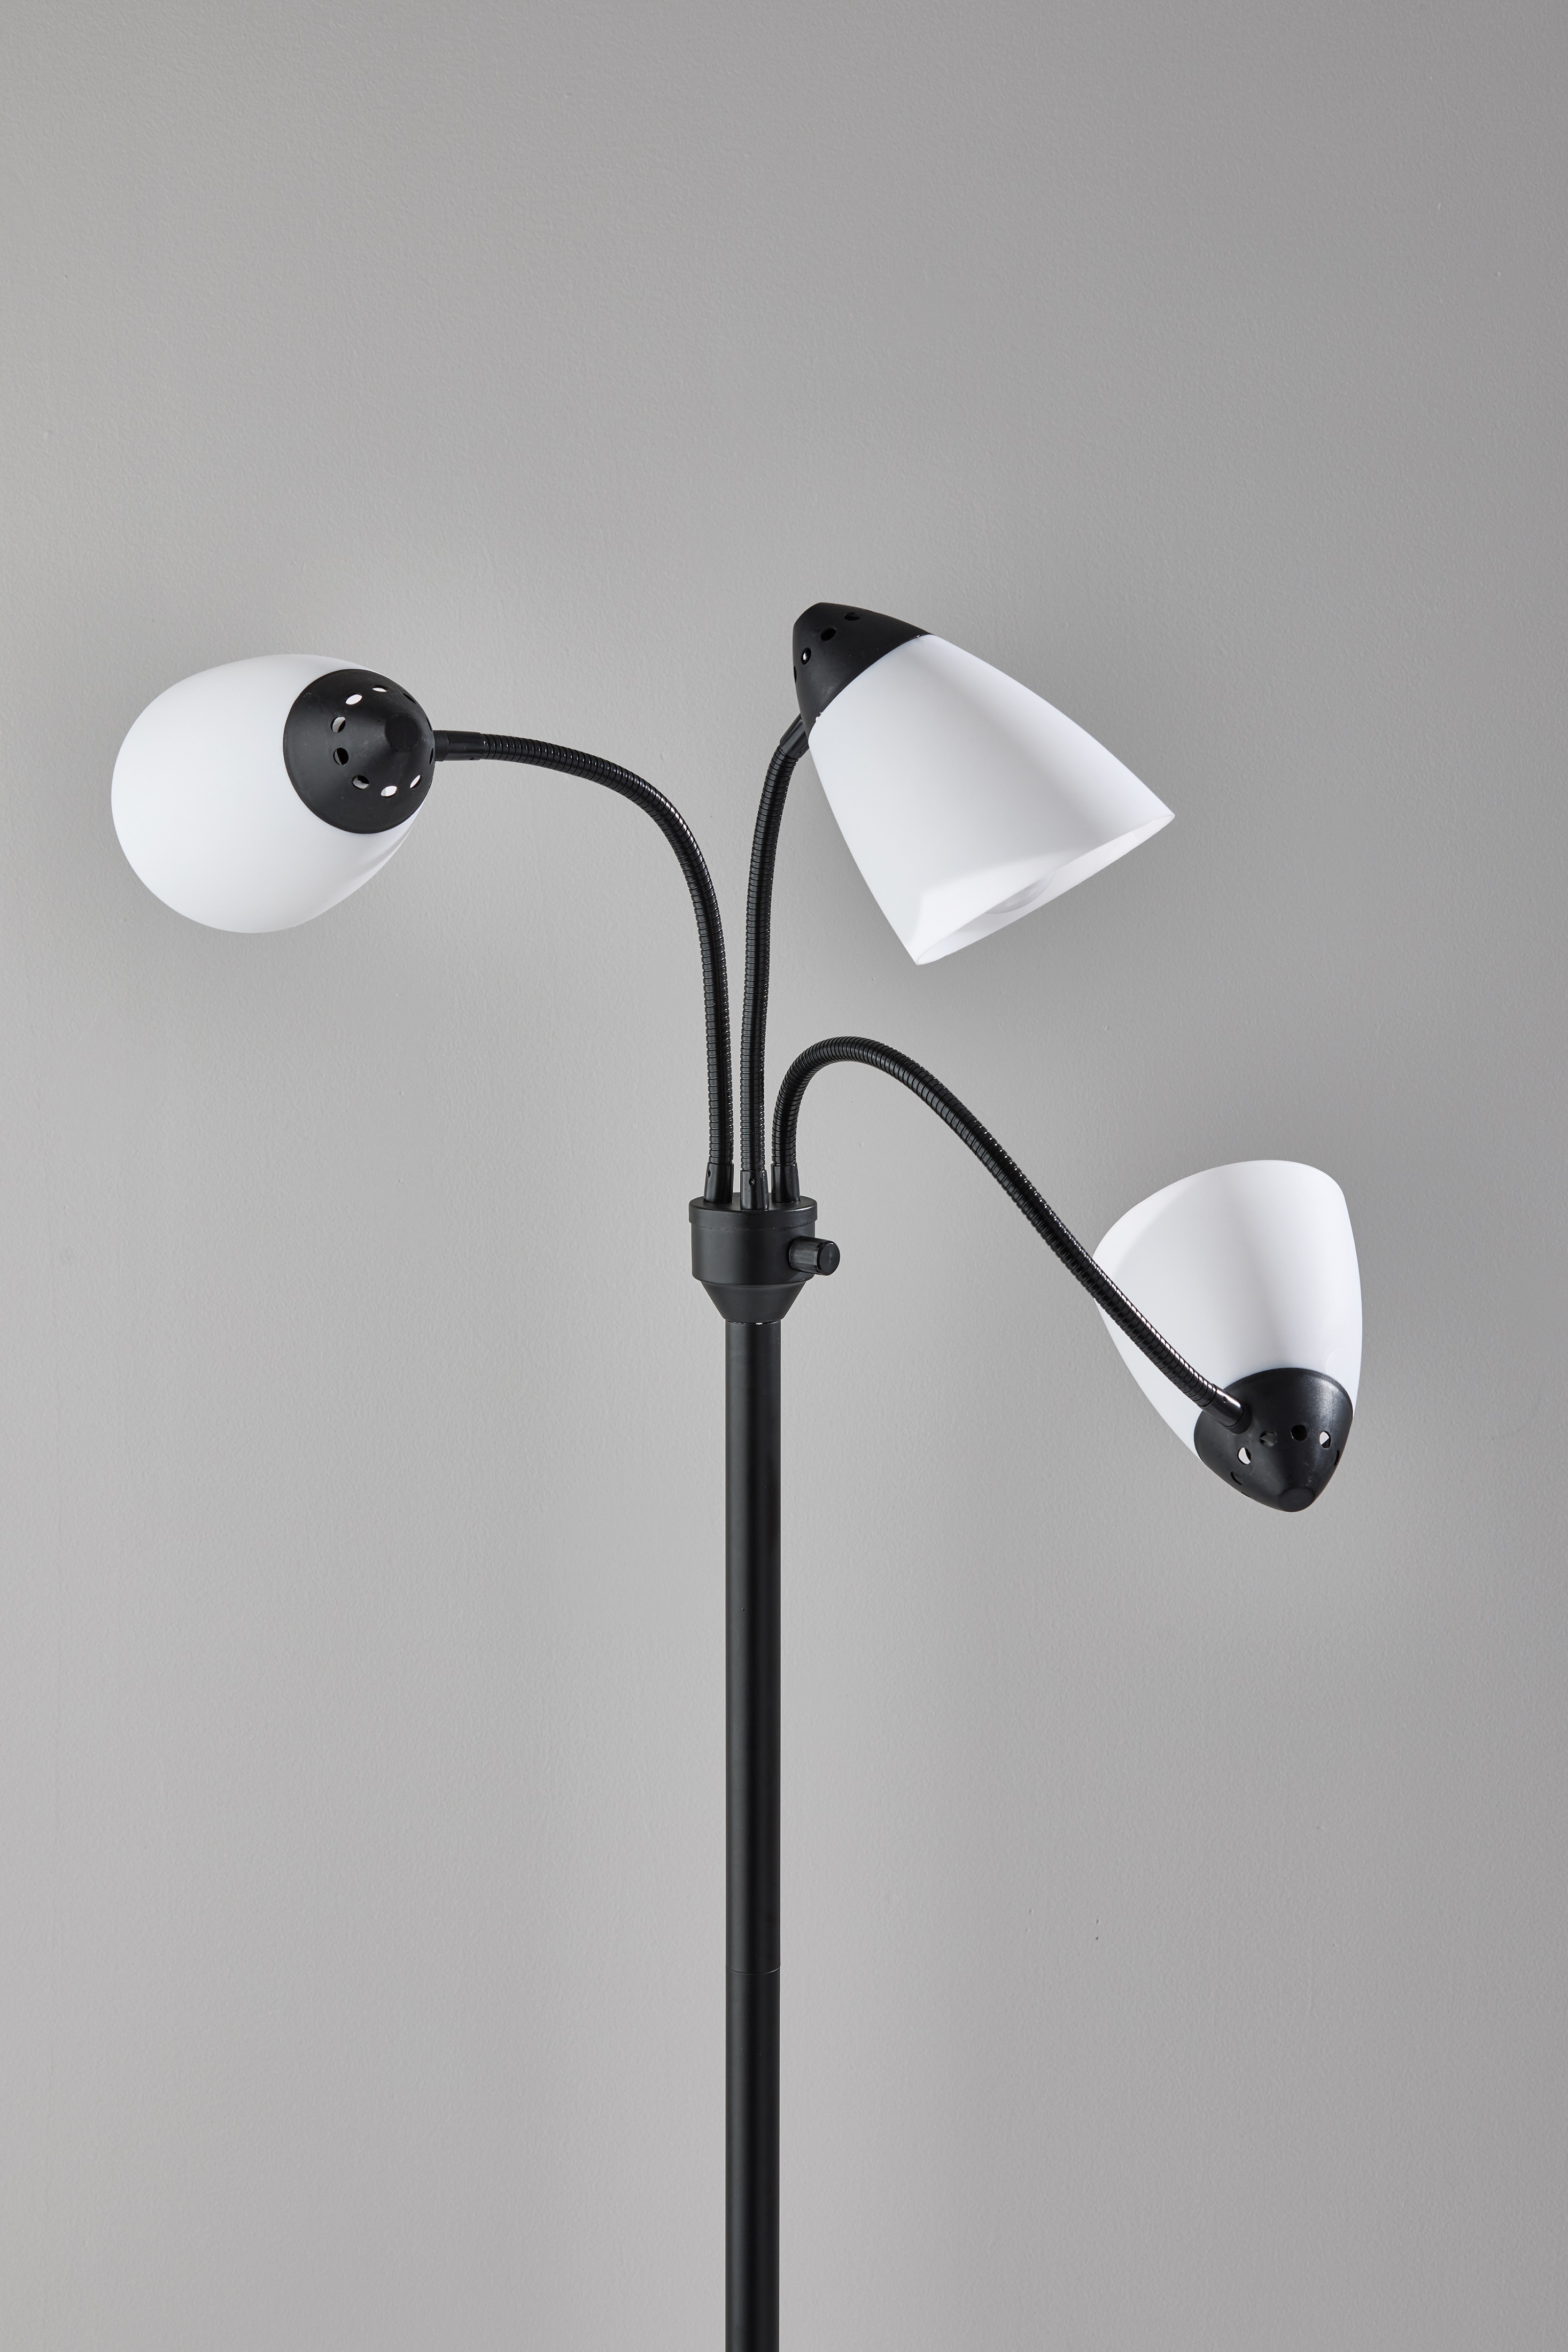 Mainstays 3 Head Adjustable Floor Lamp, Black with White Plastic Shades, Classic, Young Adult, Adult use. - image 4 of 10